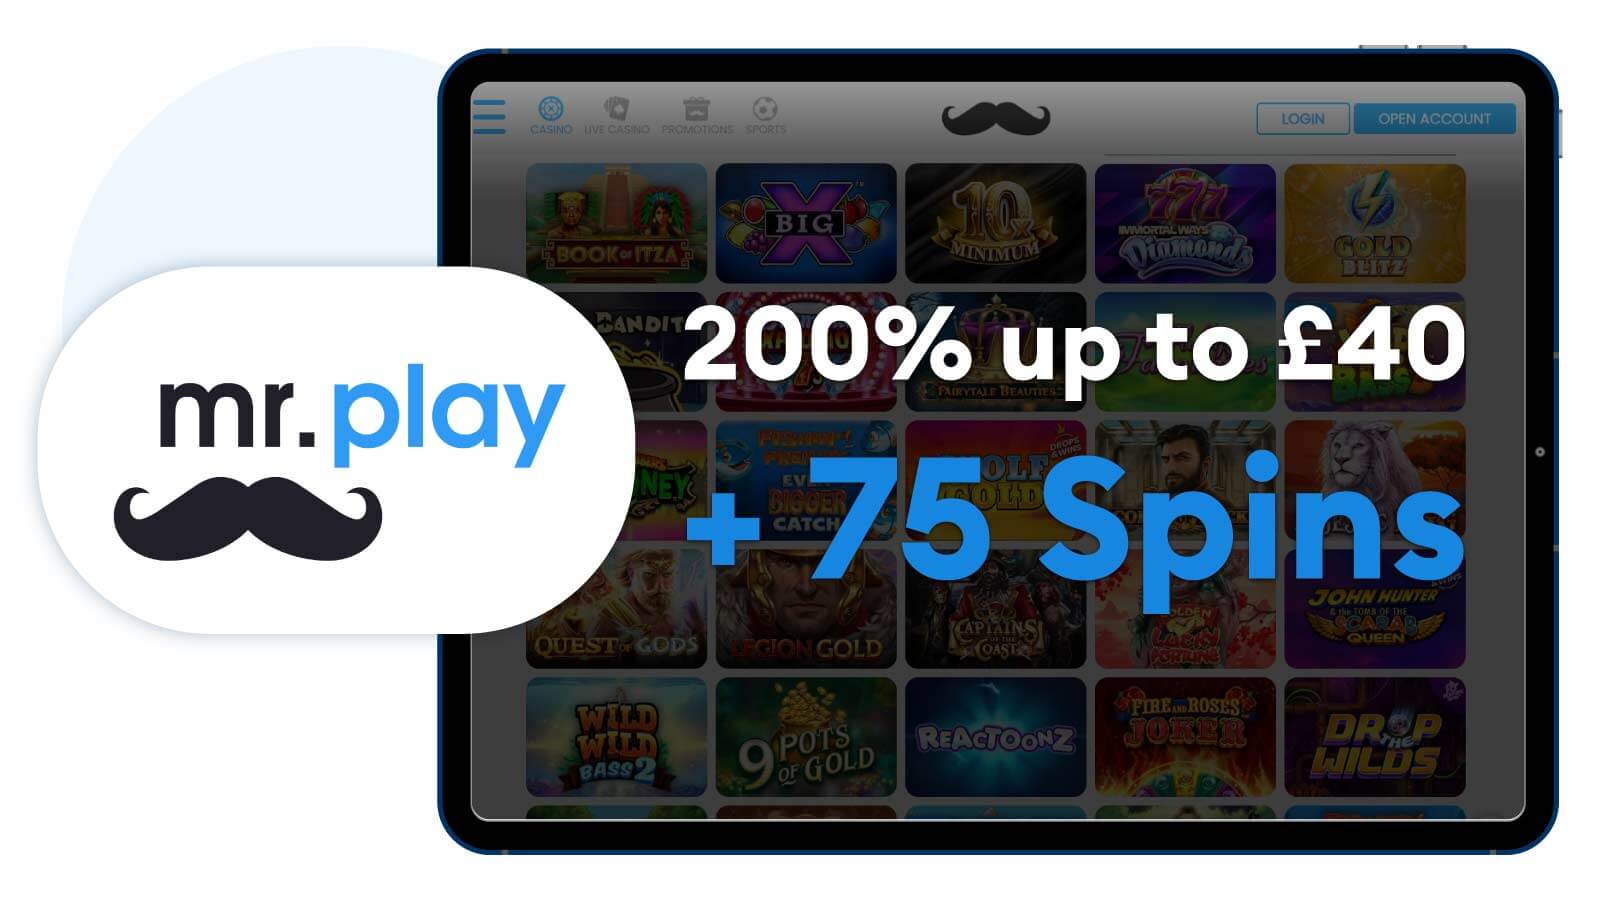 mr.play Casino 200% up to £40 + 75 spins